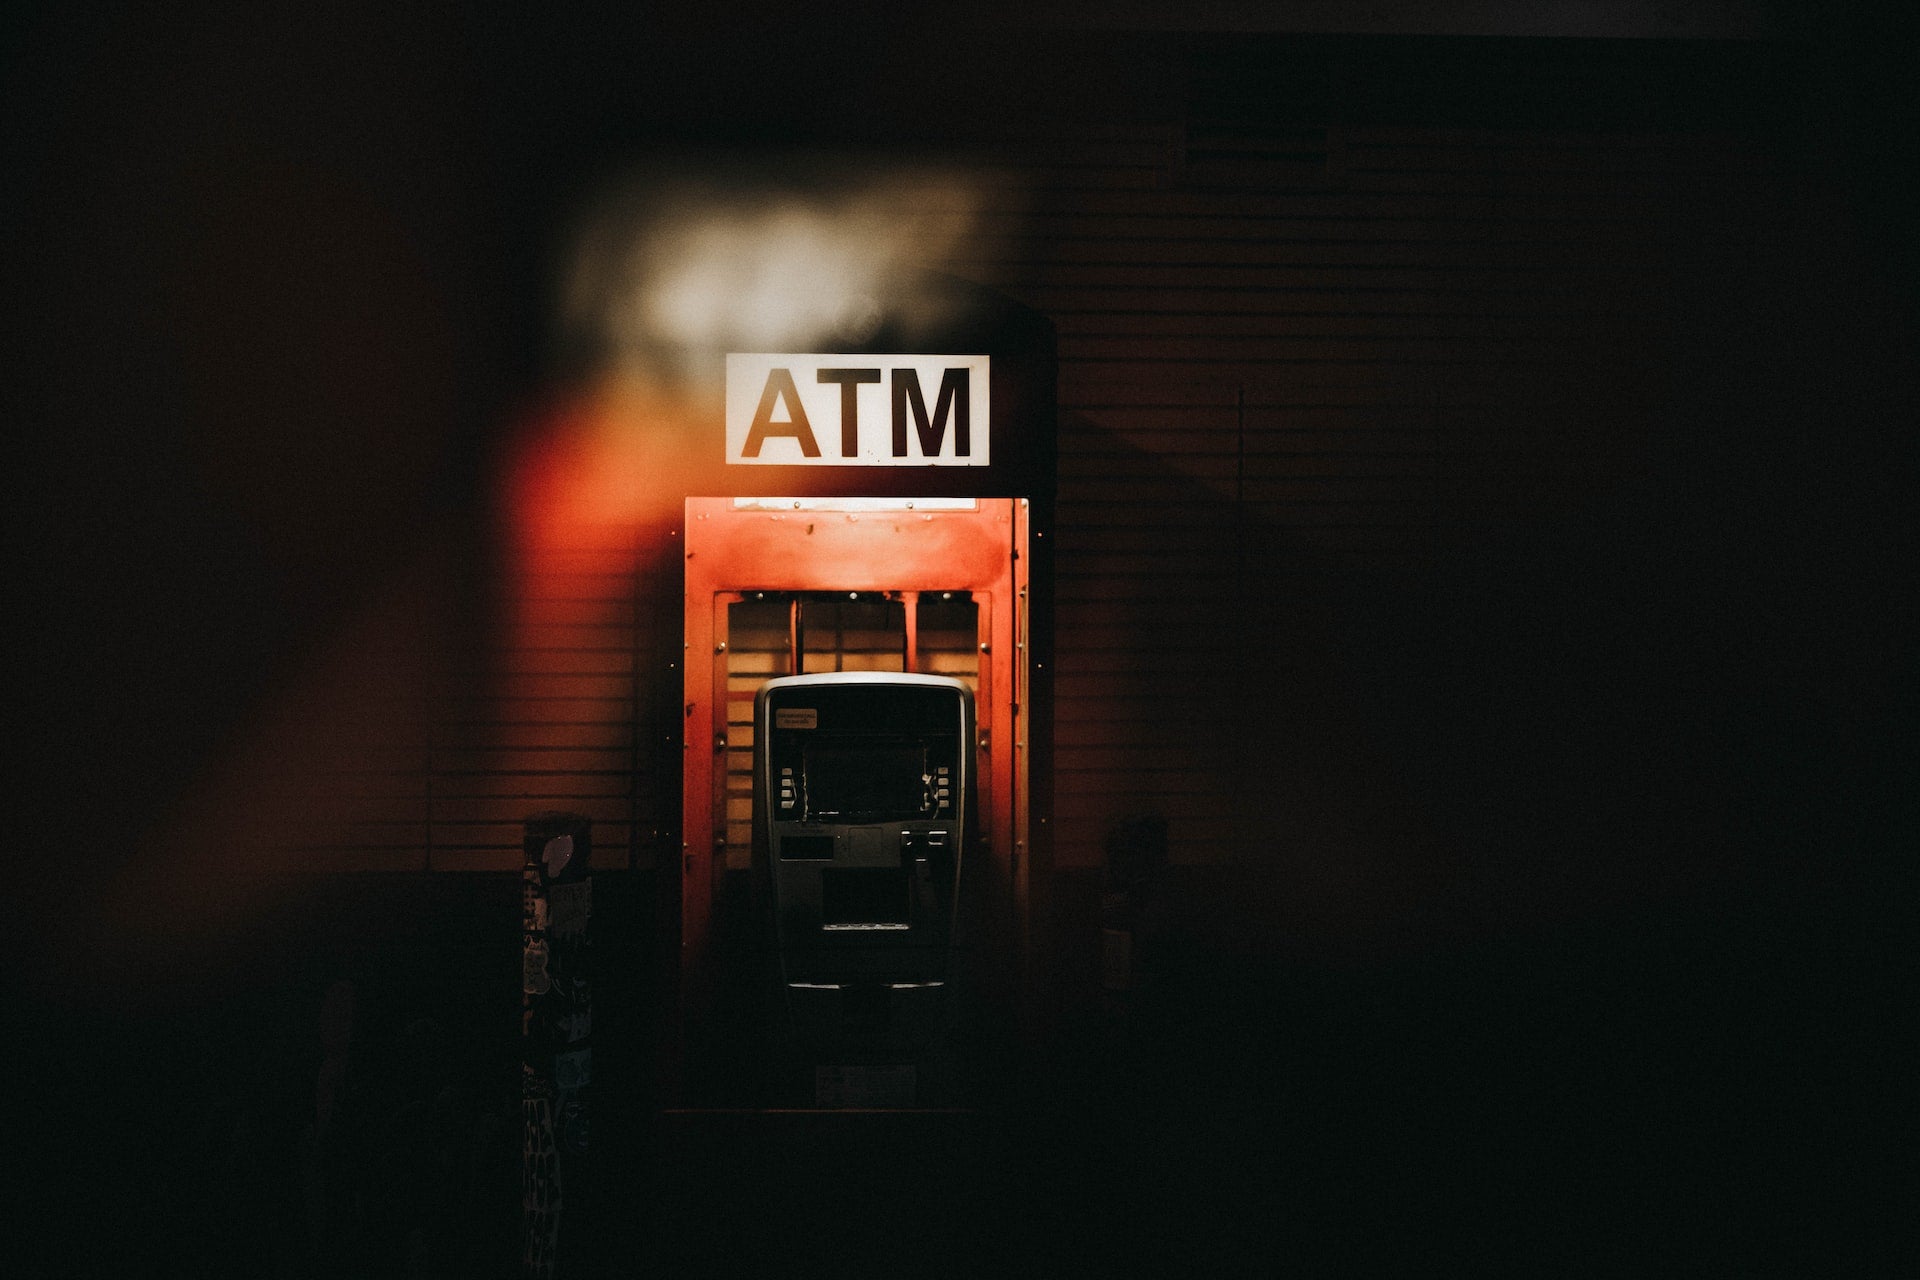 Nigeria limits ATM withdrawals to promote digital currency